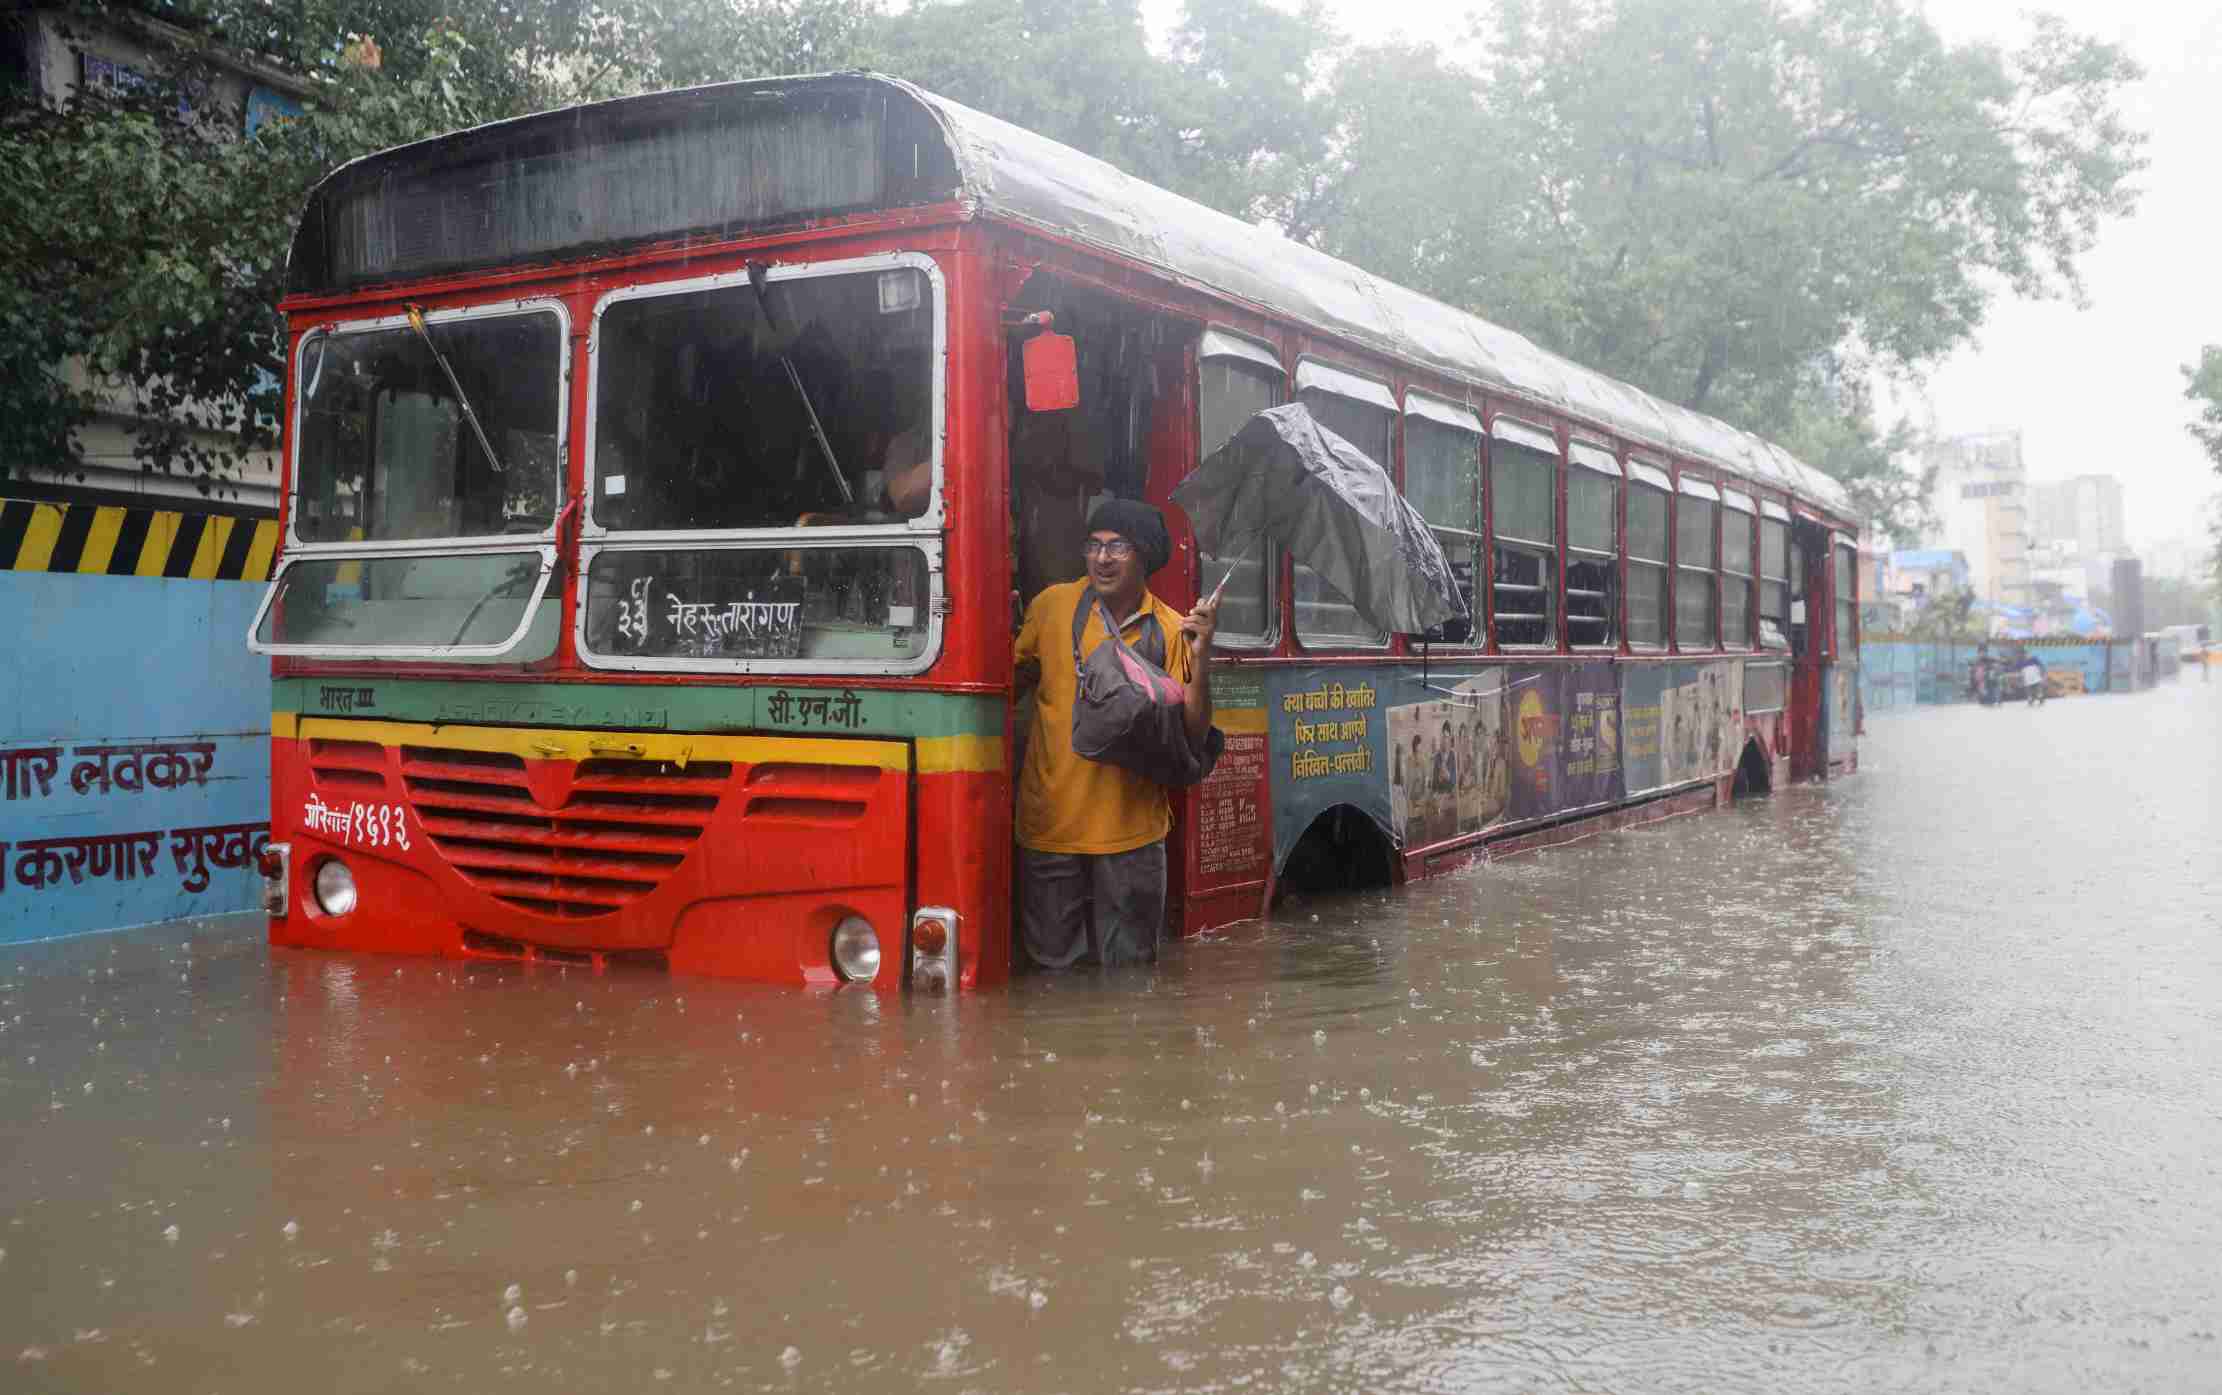 Mumbai faces waterlogging, traffic woes amid downpour; CM Shinde takes stock of situation